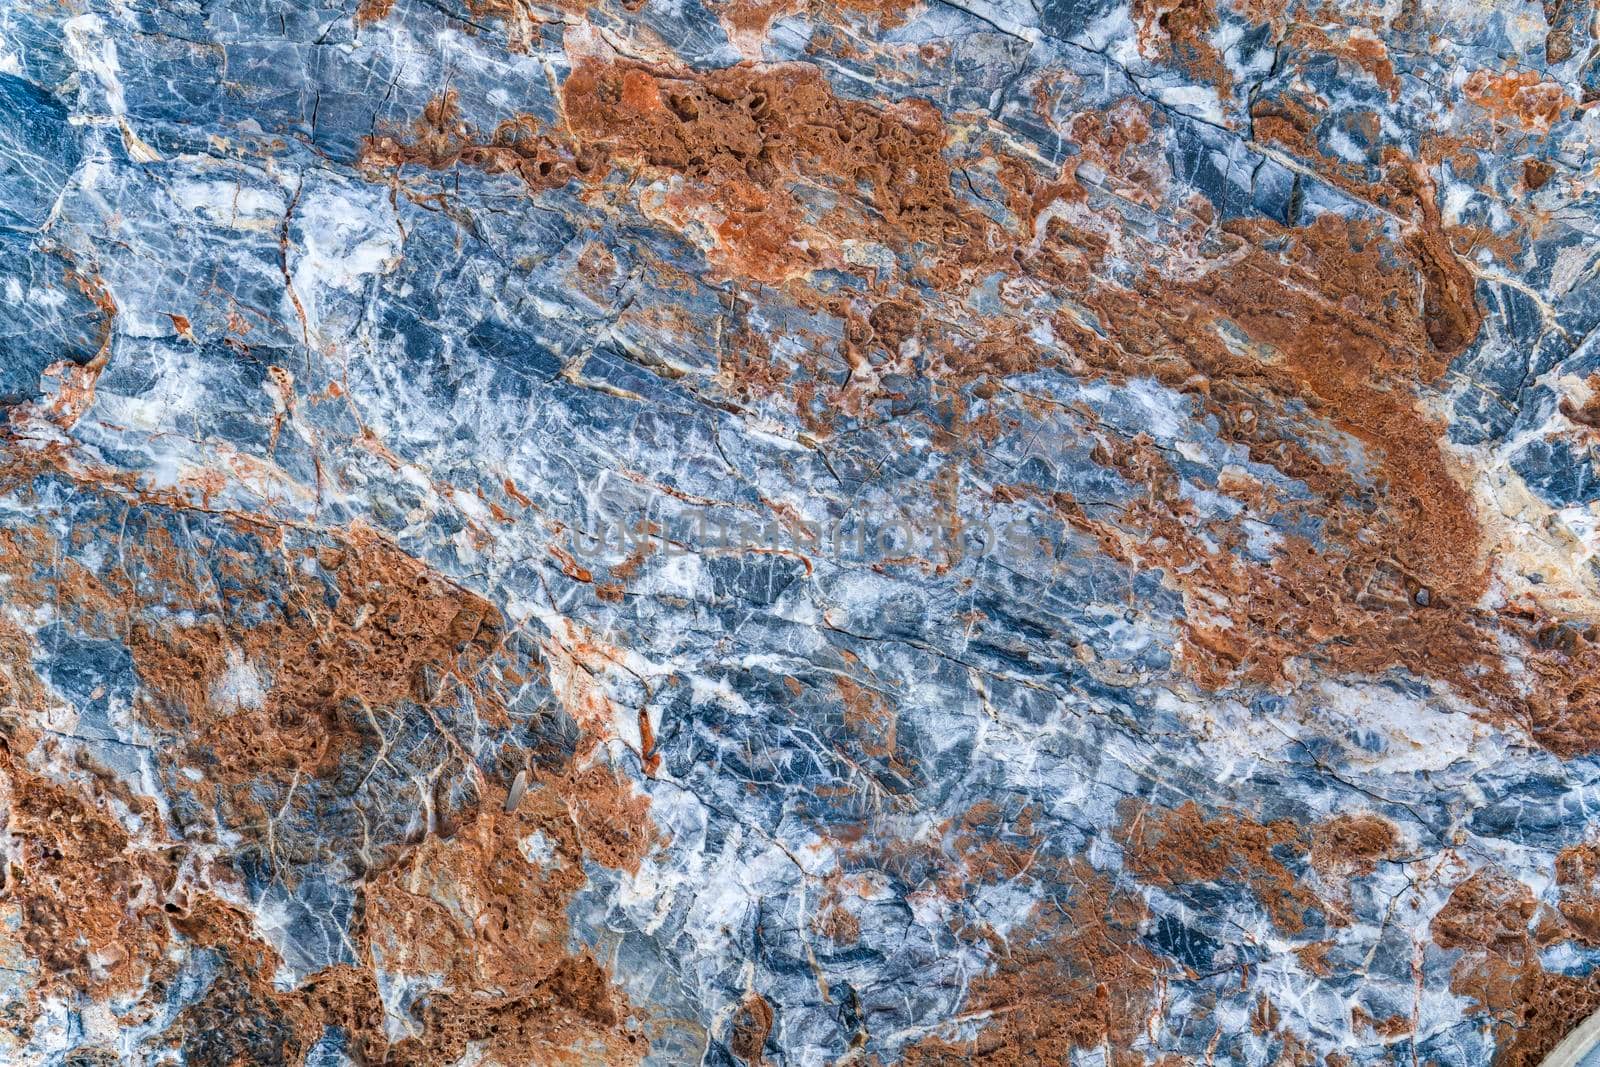 Texture of stone slab with gray-orange pattern with white streaks